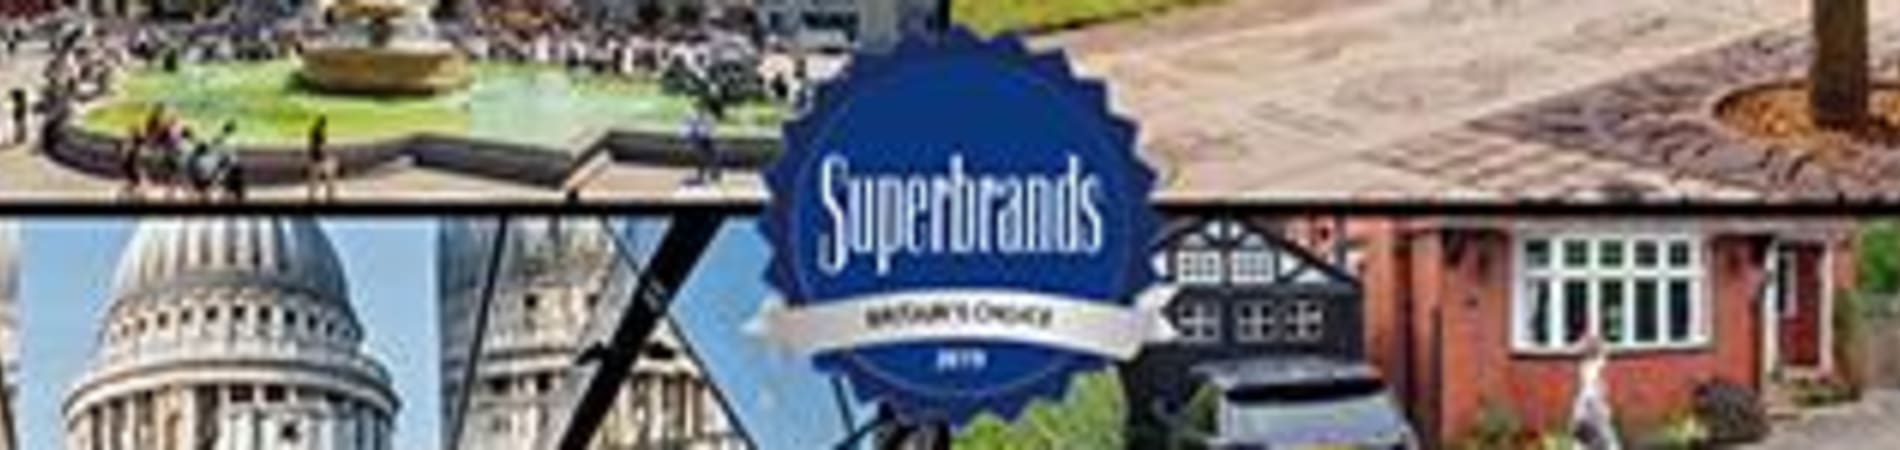 Marshalls retain Superbrand status for 10th consecutive year